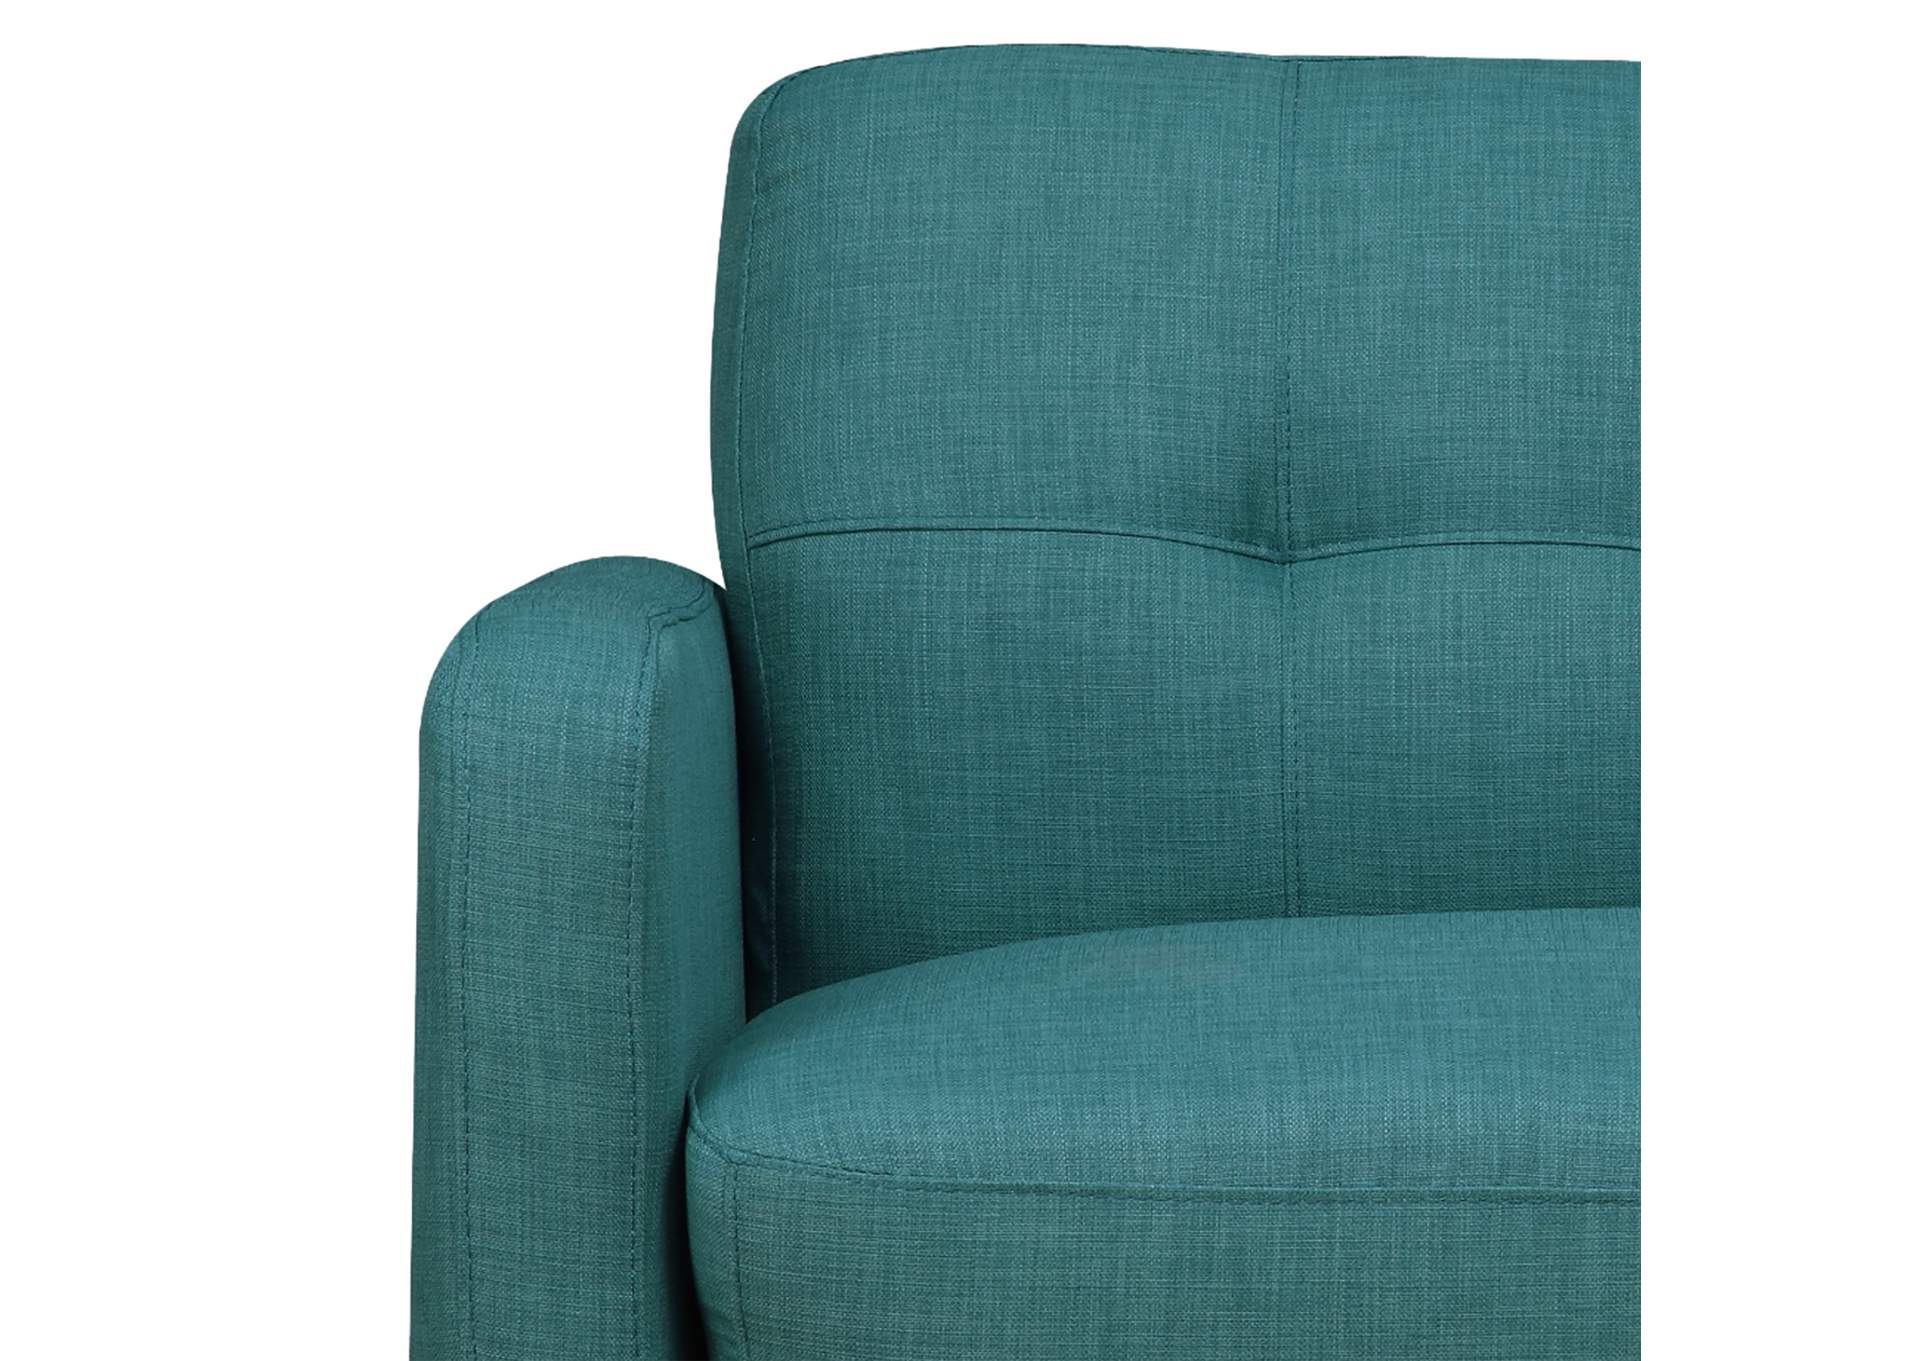 Hadley 4480 Sofa Heirloom Teal With No Pillow,Elements